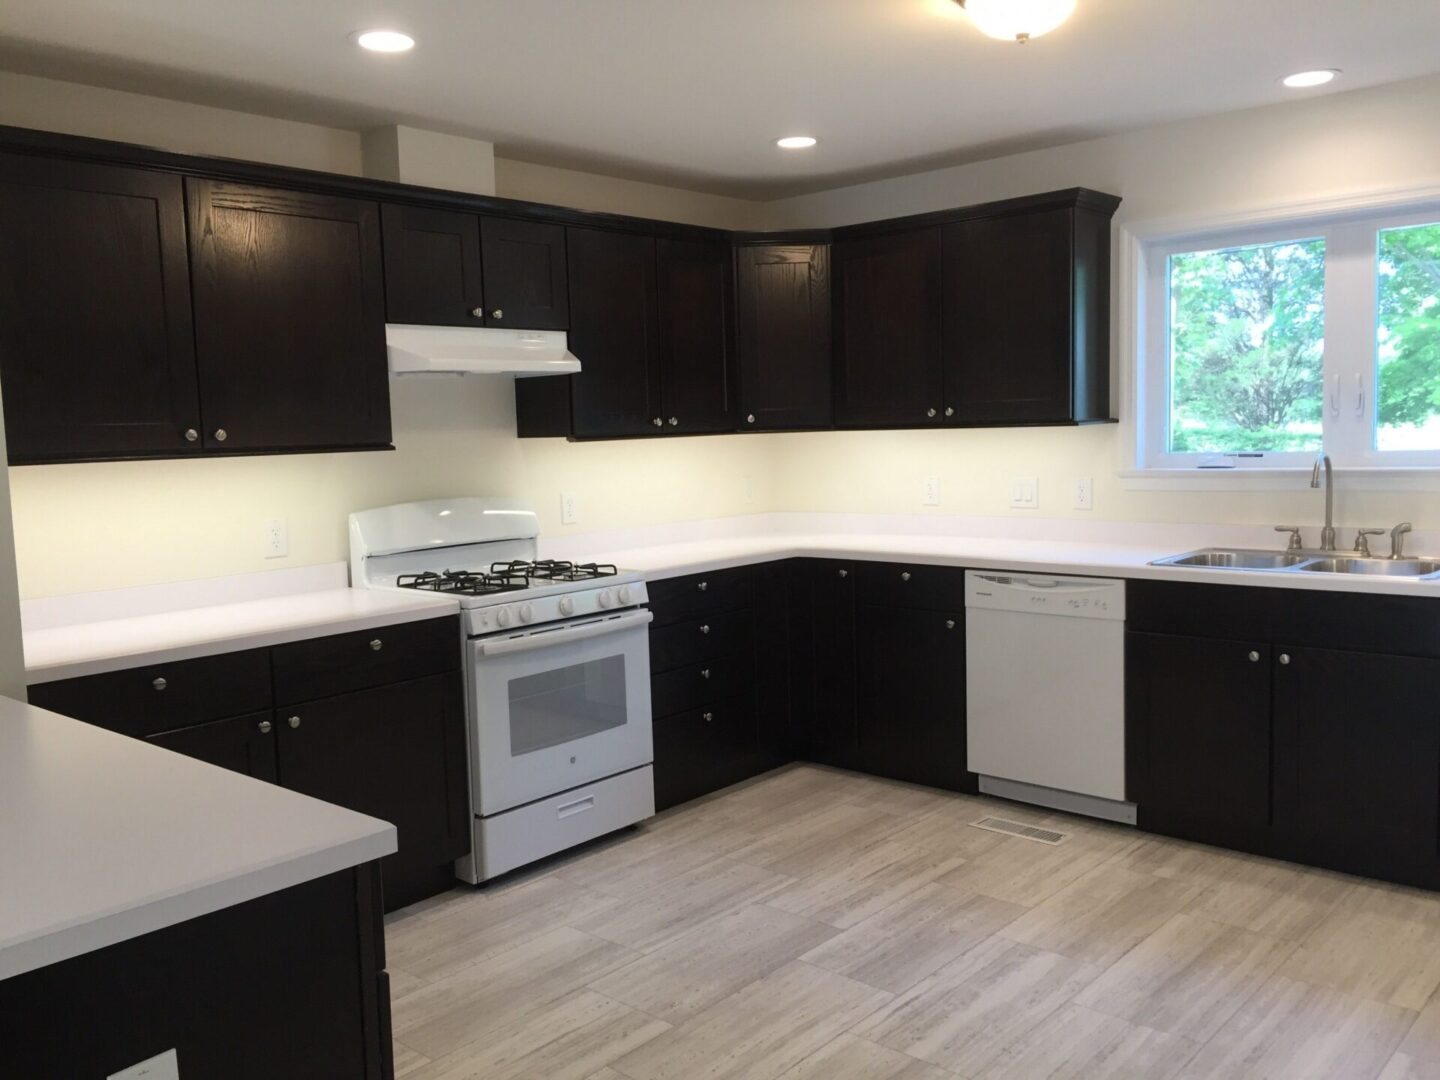 Black-and-white furnished kitchen